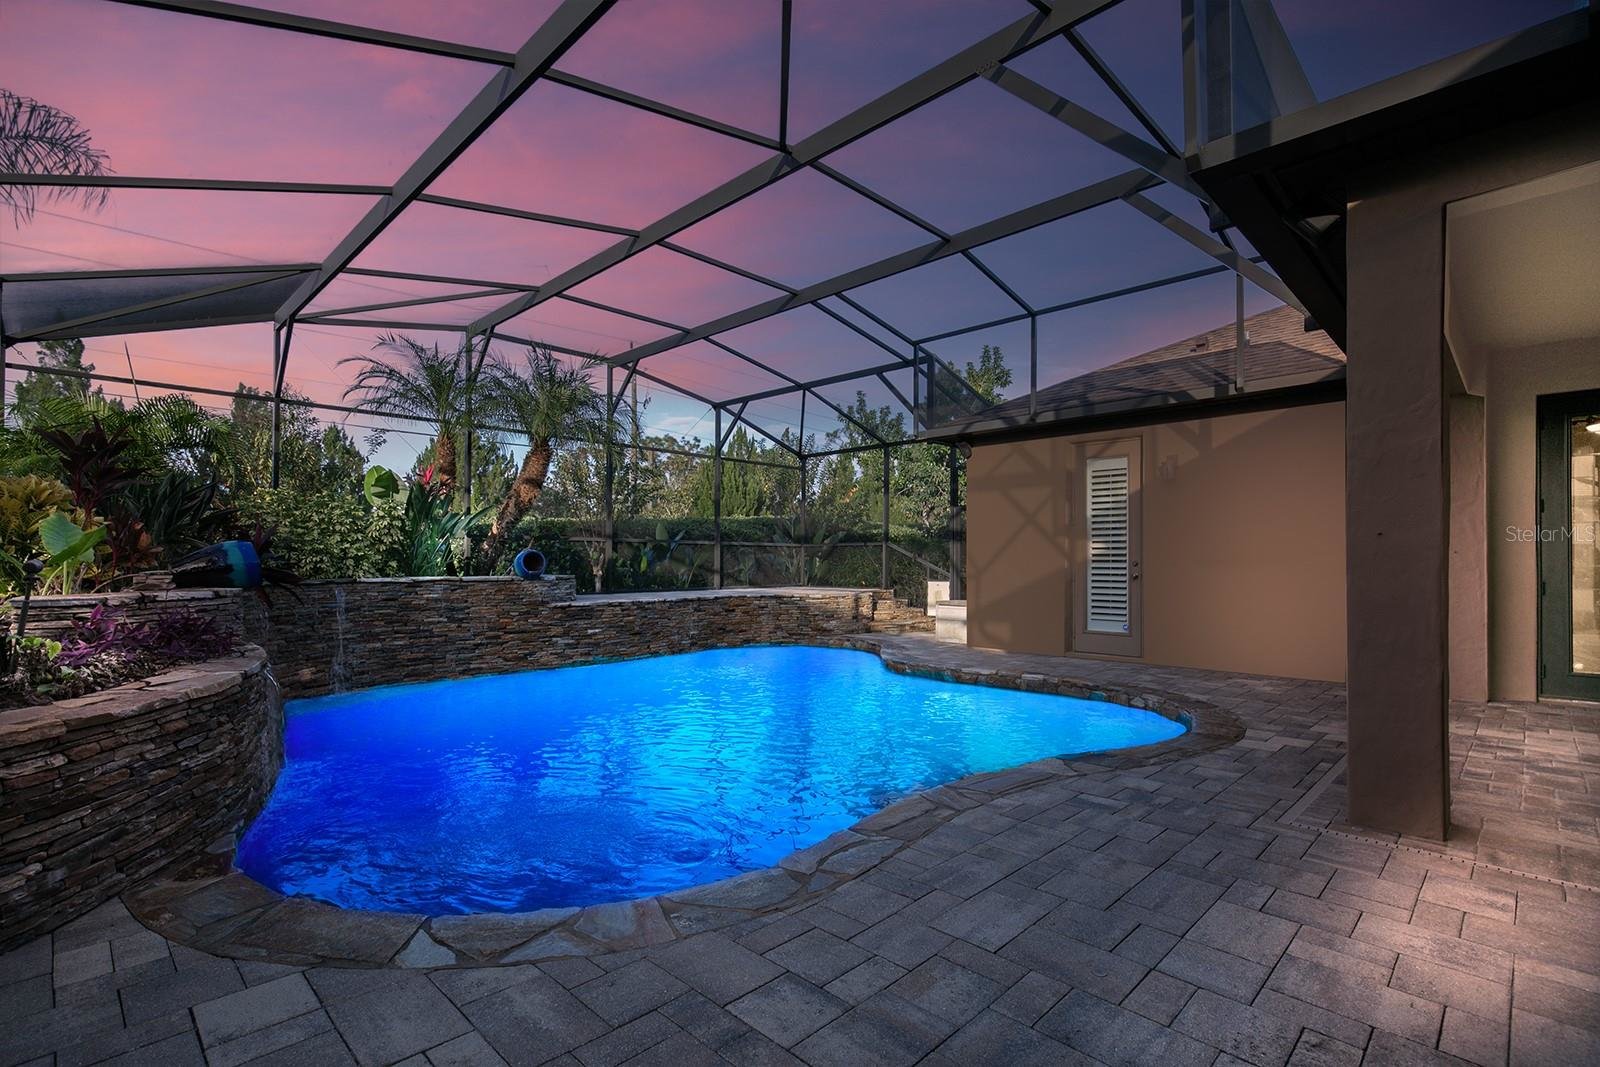 back enclosed patio with pool at night